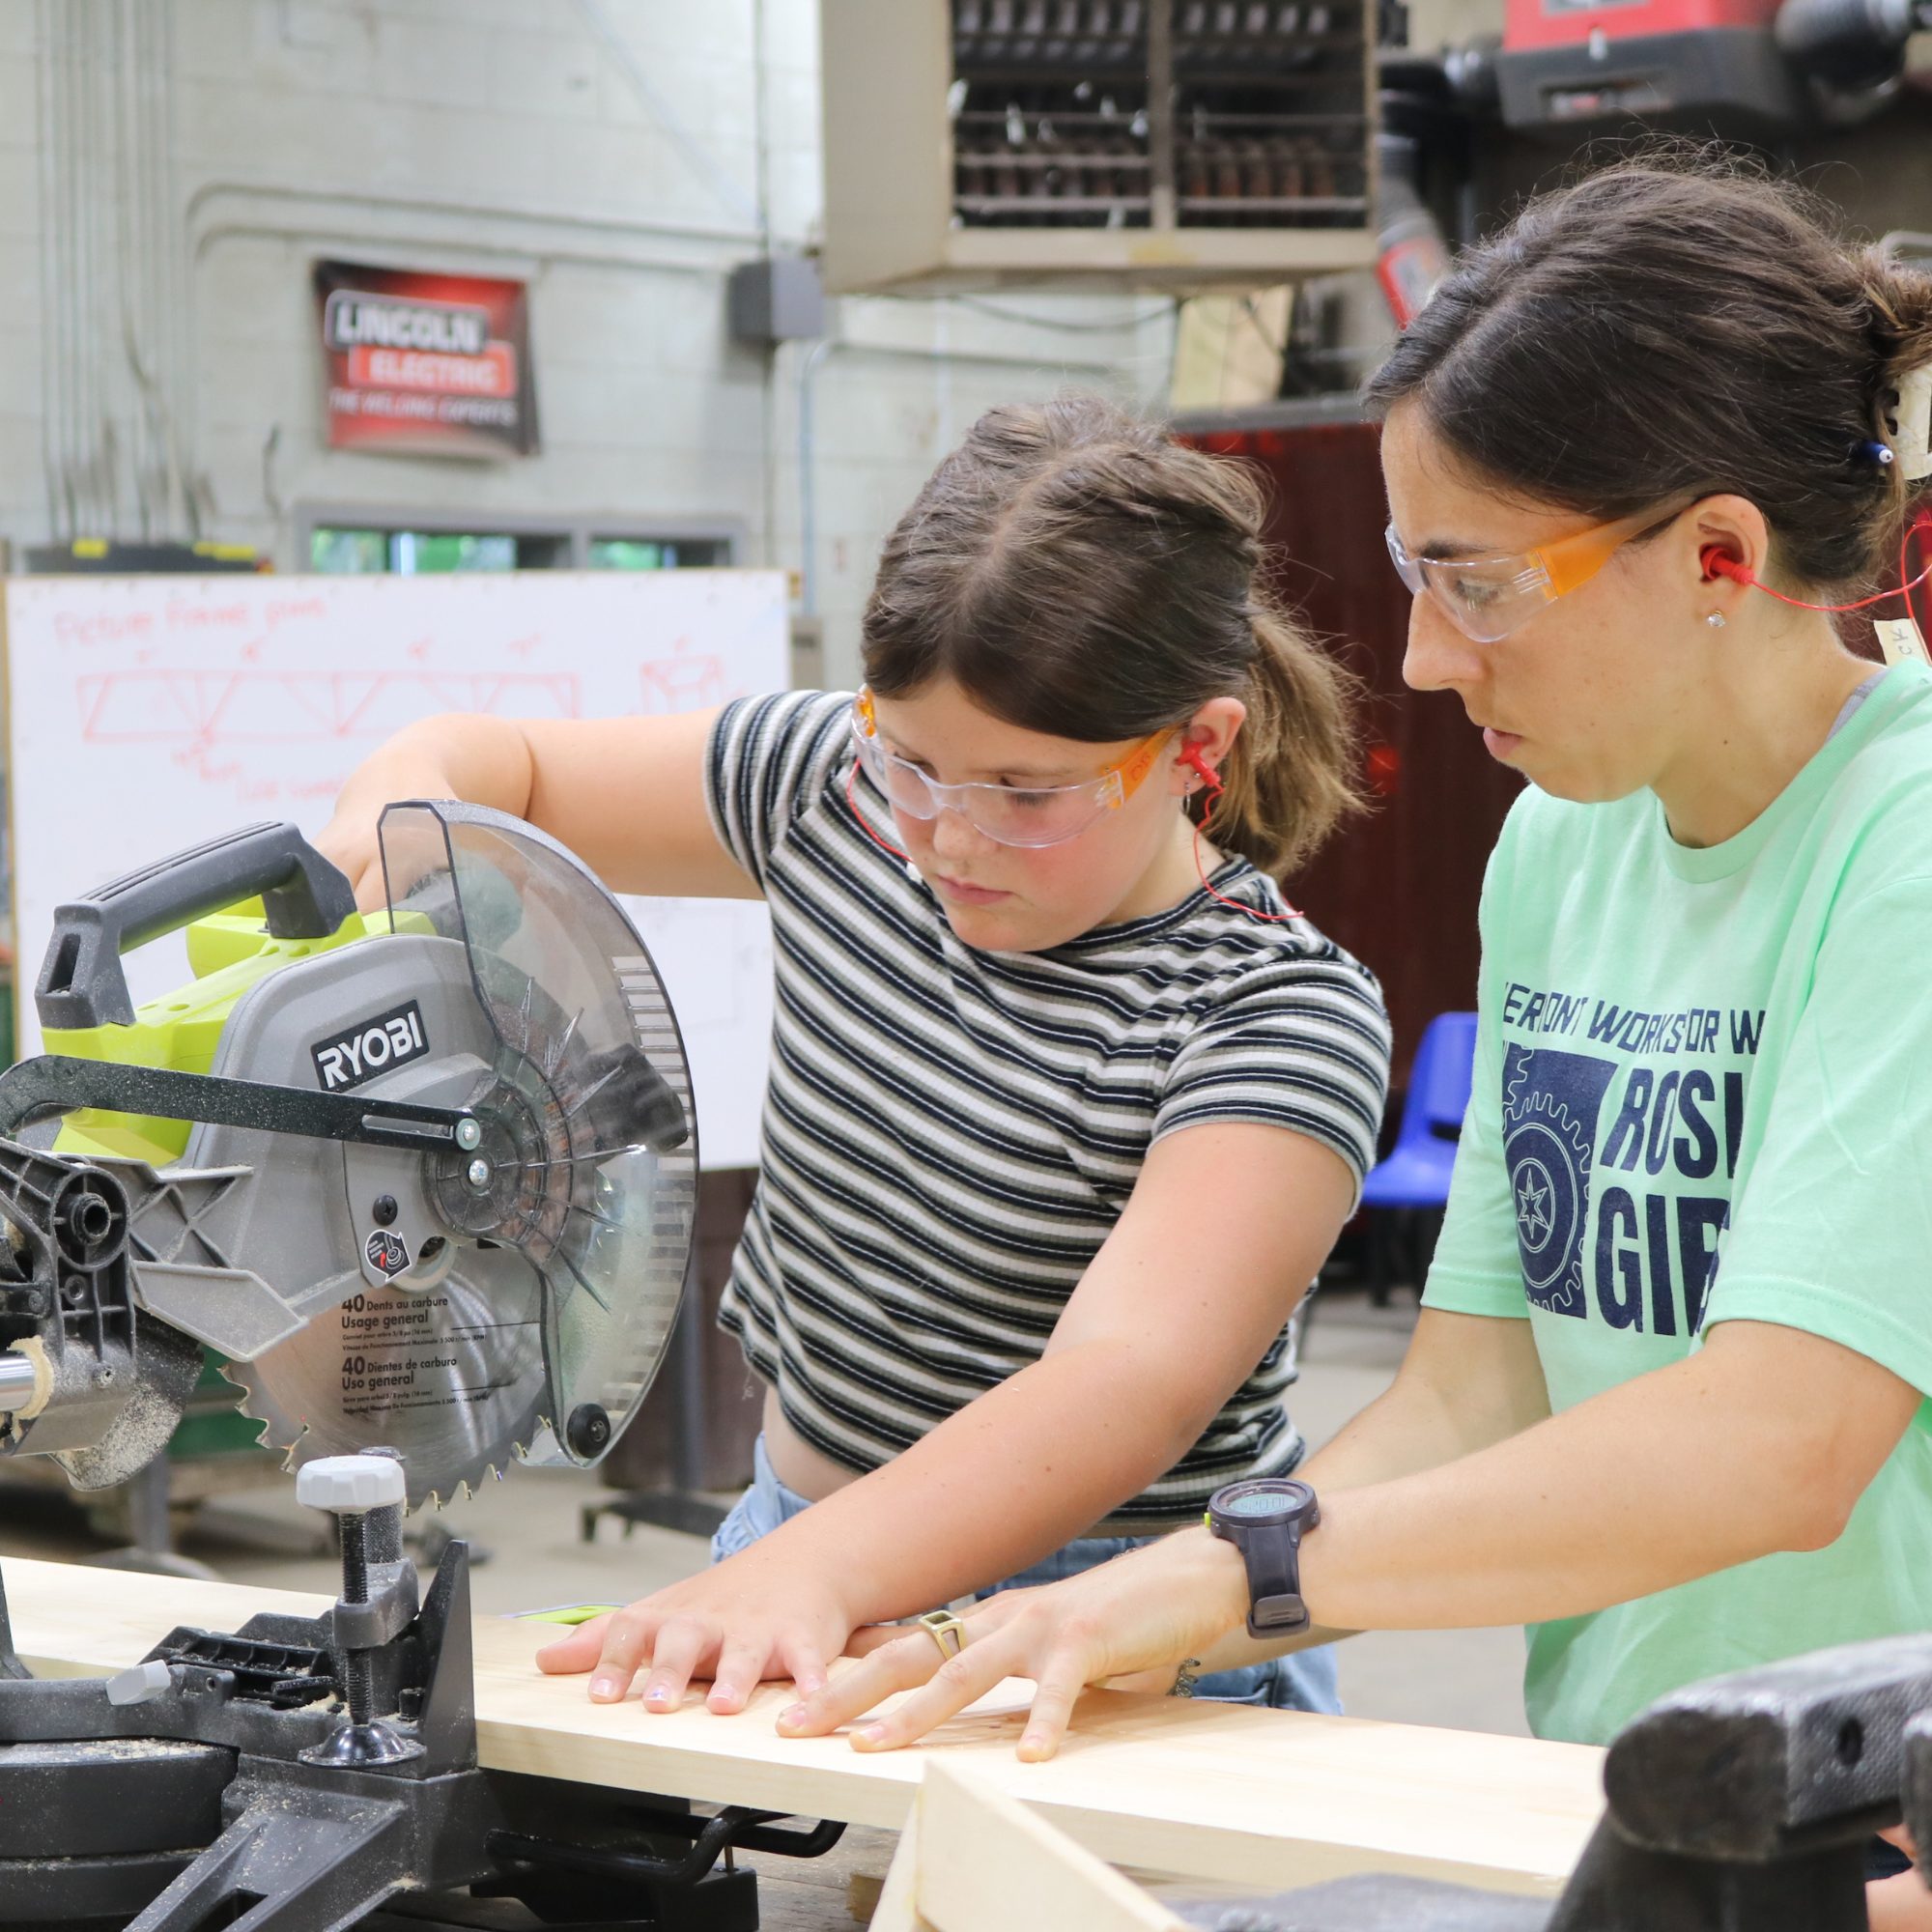 VWW staff member helps a Rosie's Girls camper to cut lumber with a chop saw.